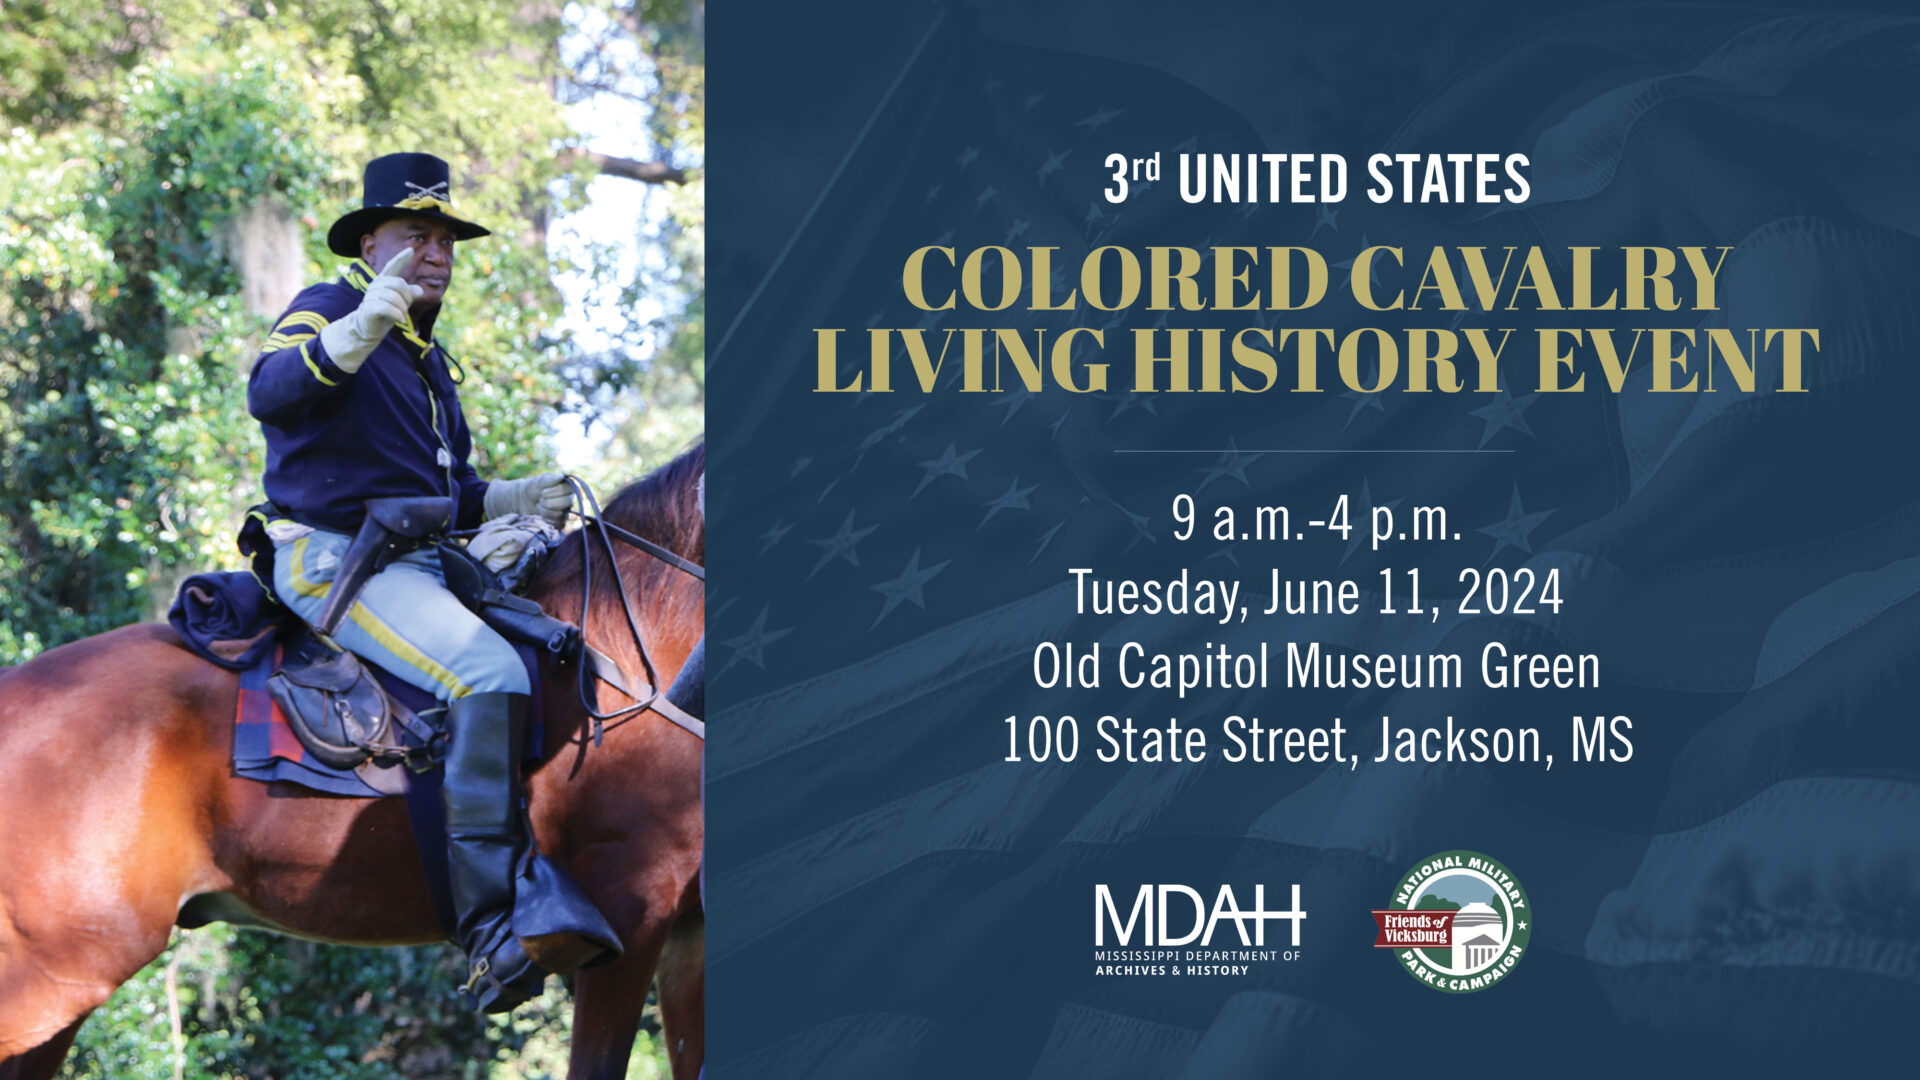 3rd United States Colored Cavalry Living History Event